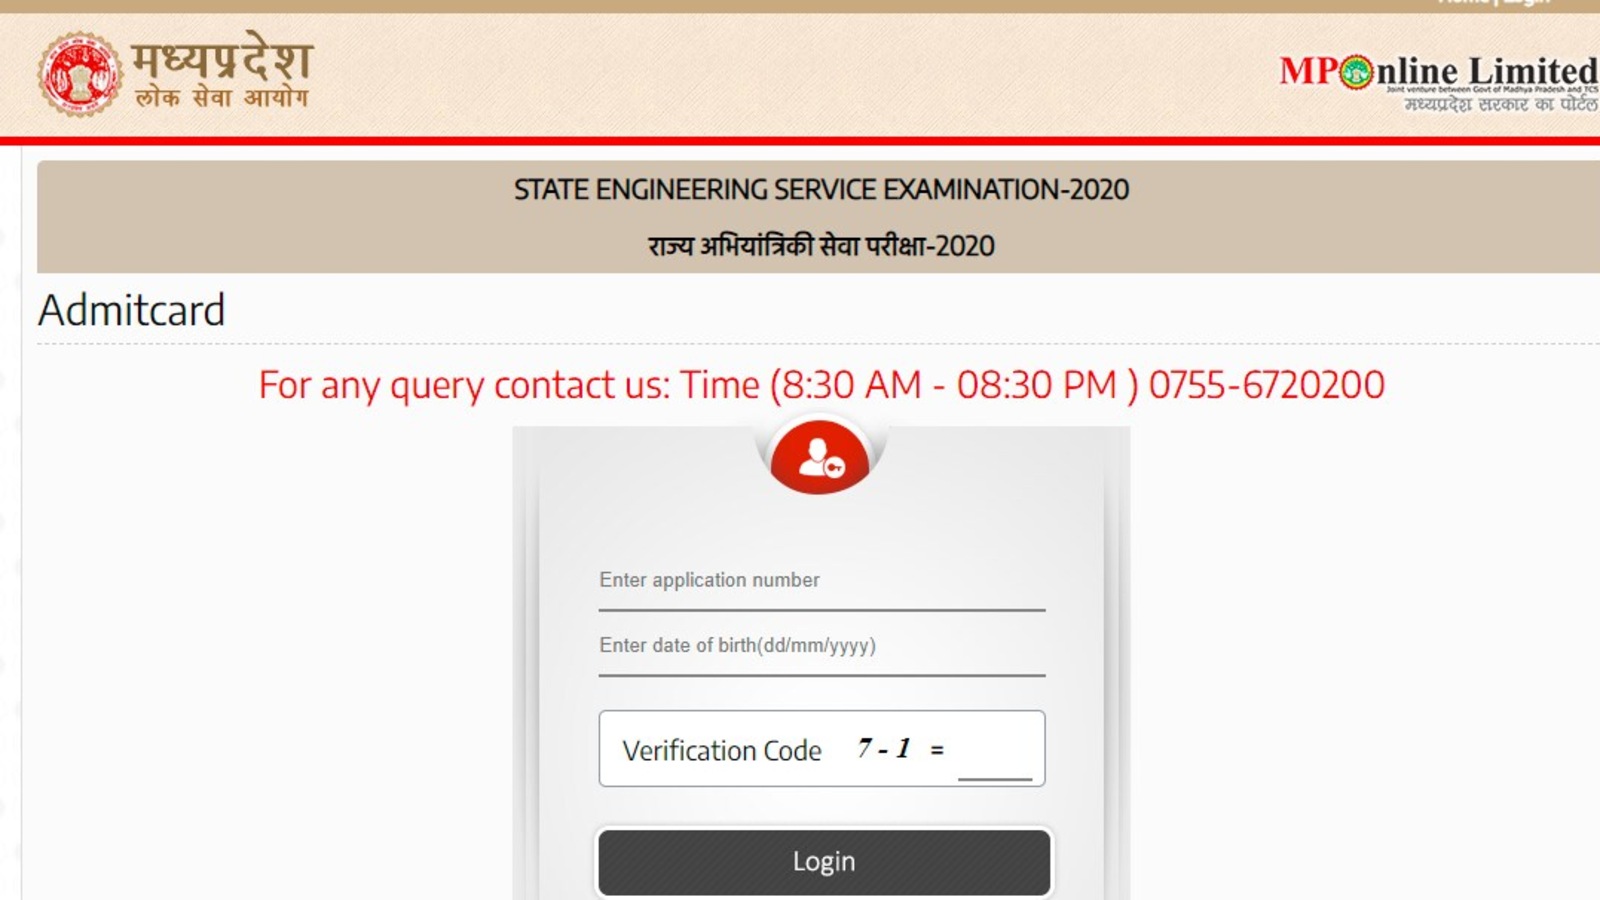 MPPSC State Engineering Service Exam admit card 2020 released at mppsc.nic.in